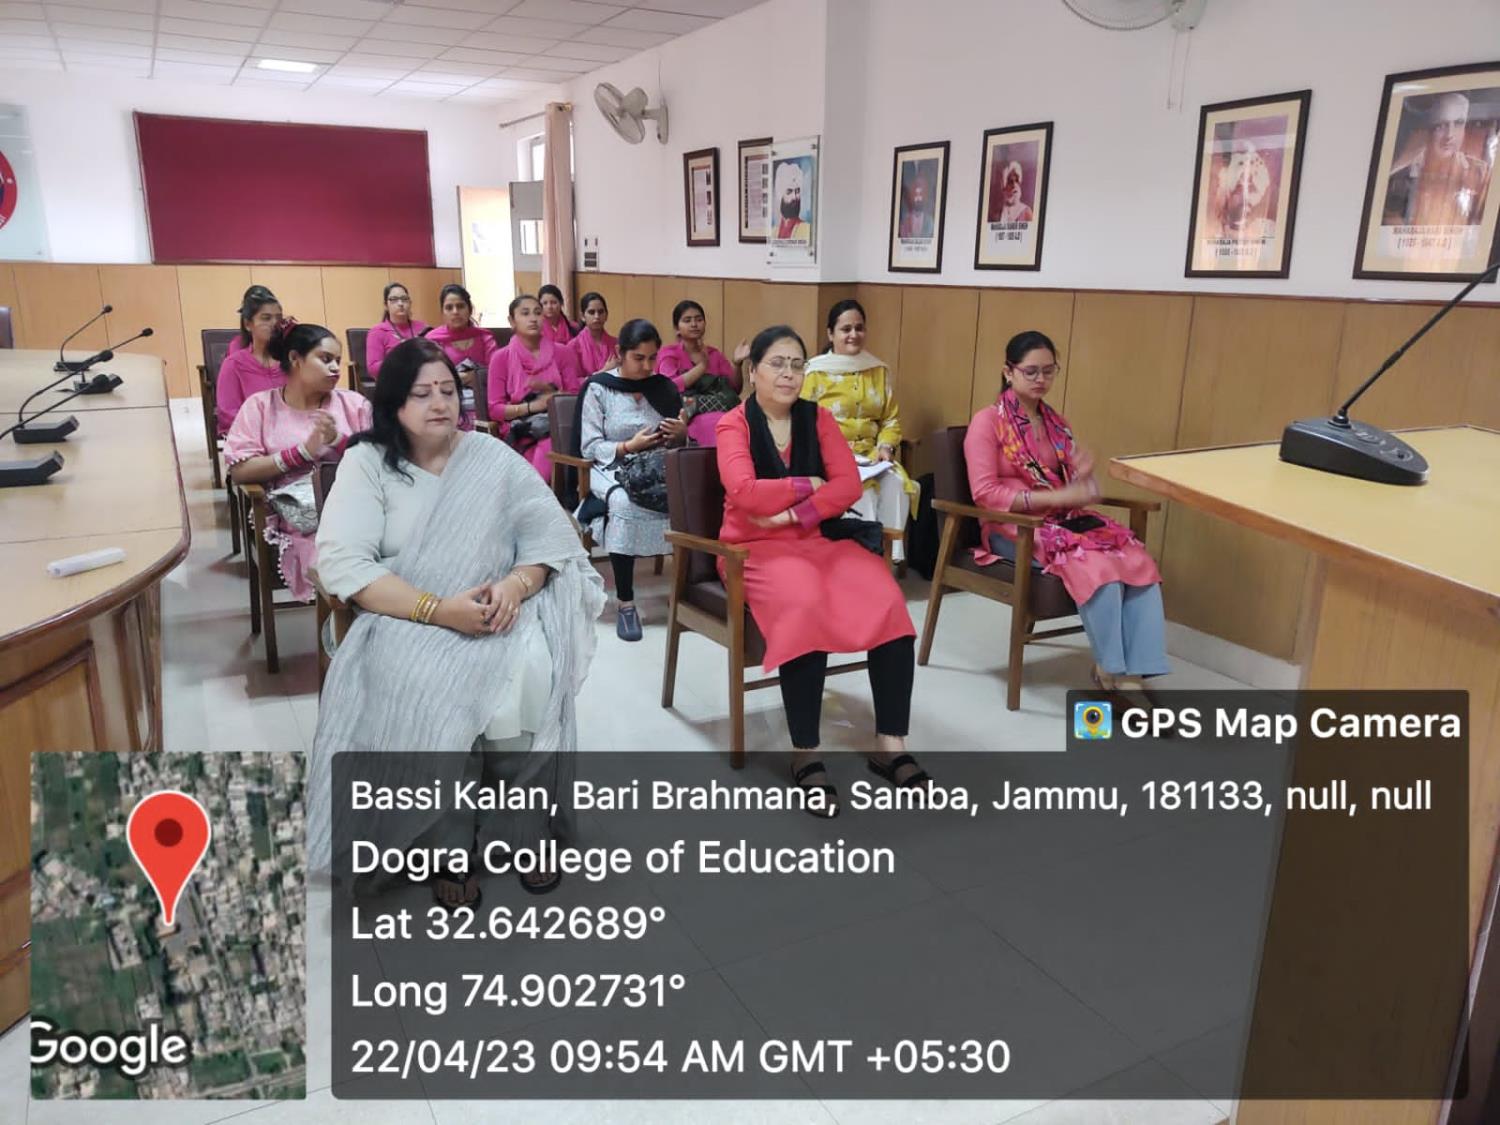 Dogra College of Education Celebrated World Earth Day